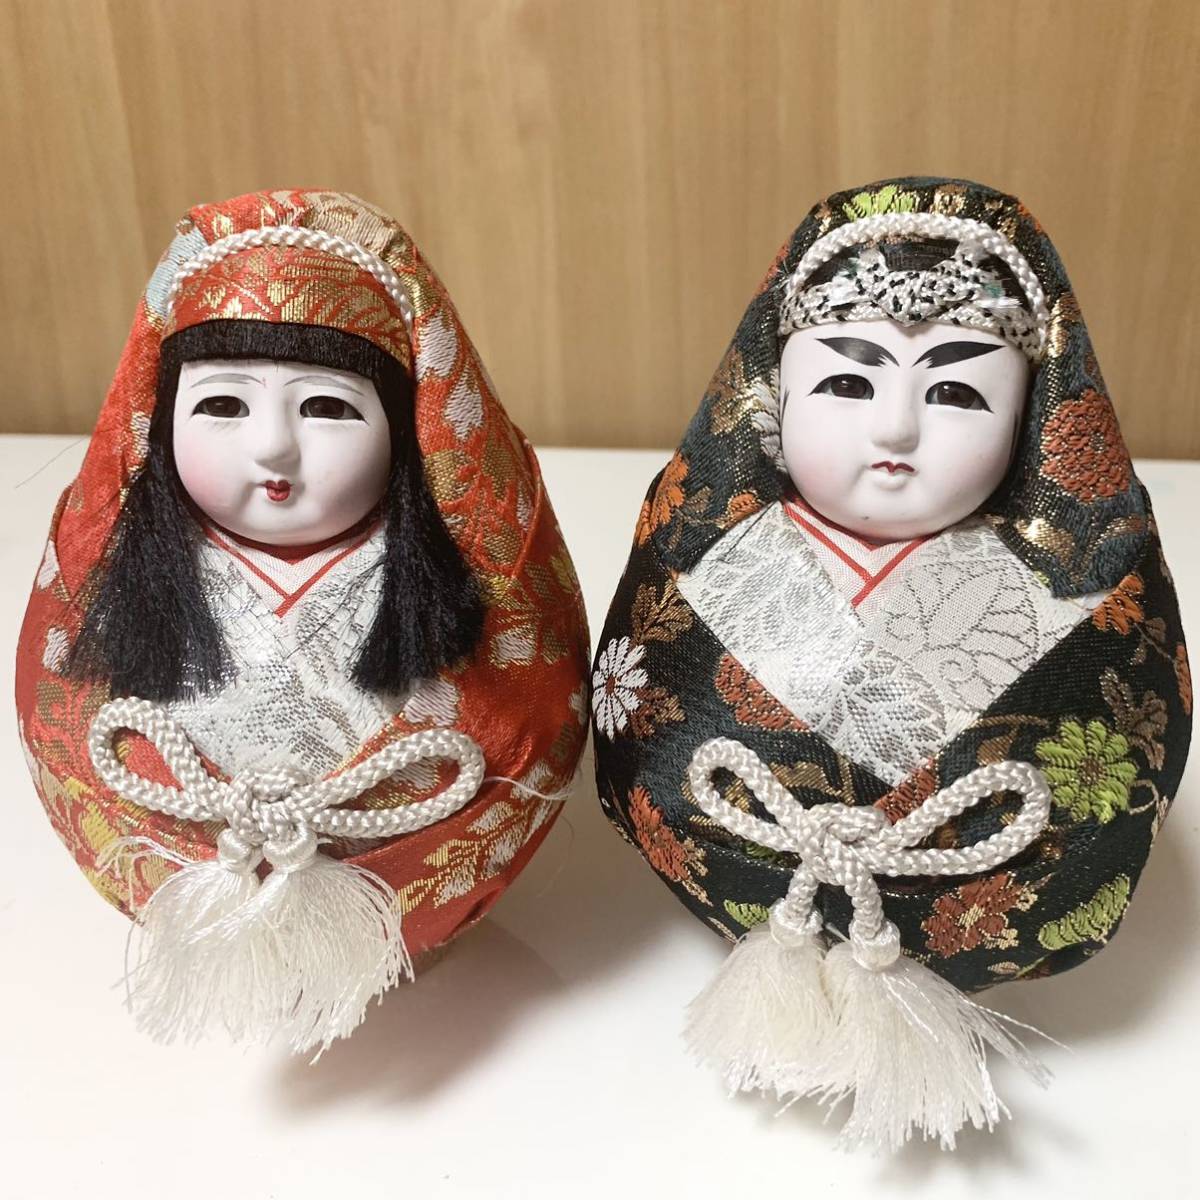 * anonymity delivery ... Showa Retro miscellaneous goods . earth toy Japanese doll doll hinaningyo large inside paint hinaningyou tradition industrial arts Hinamatsuri rare rare period thing 